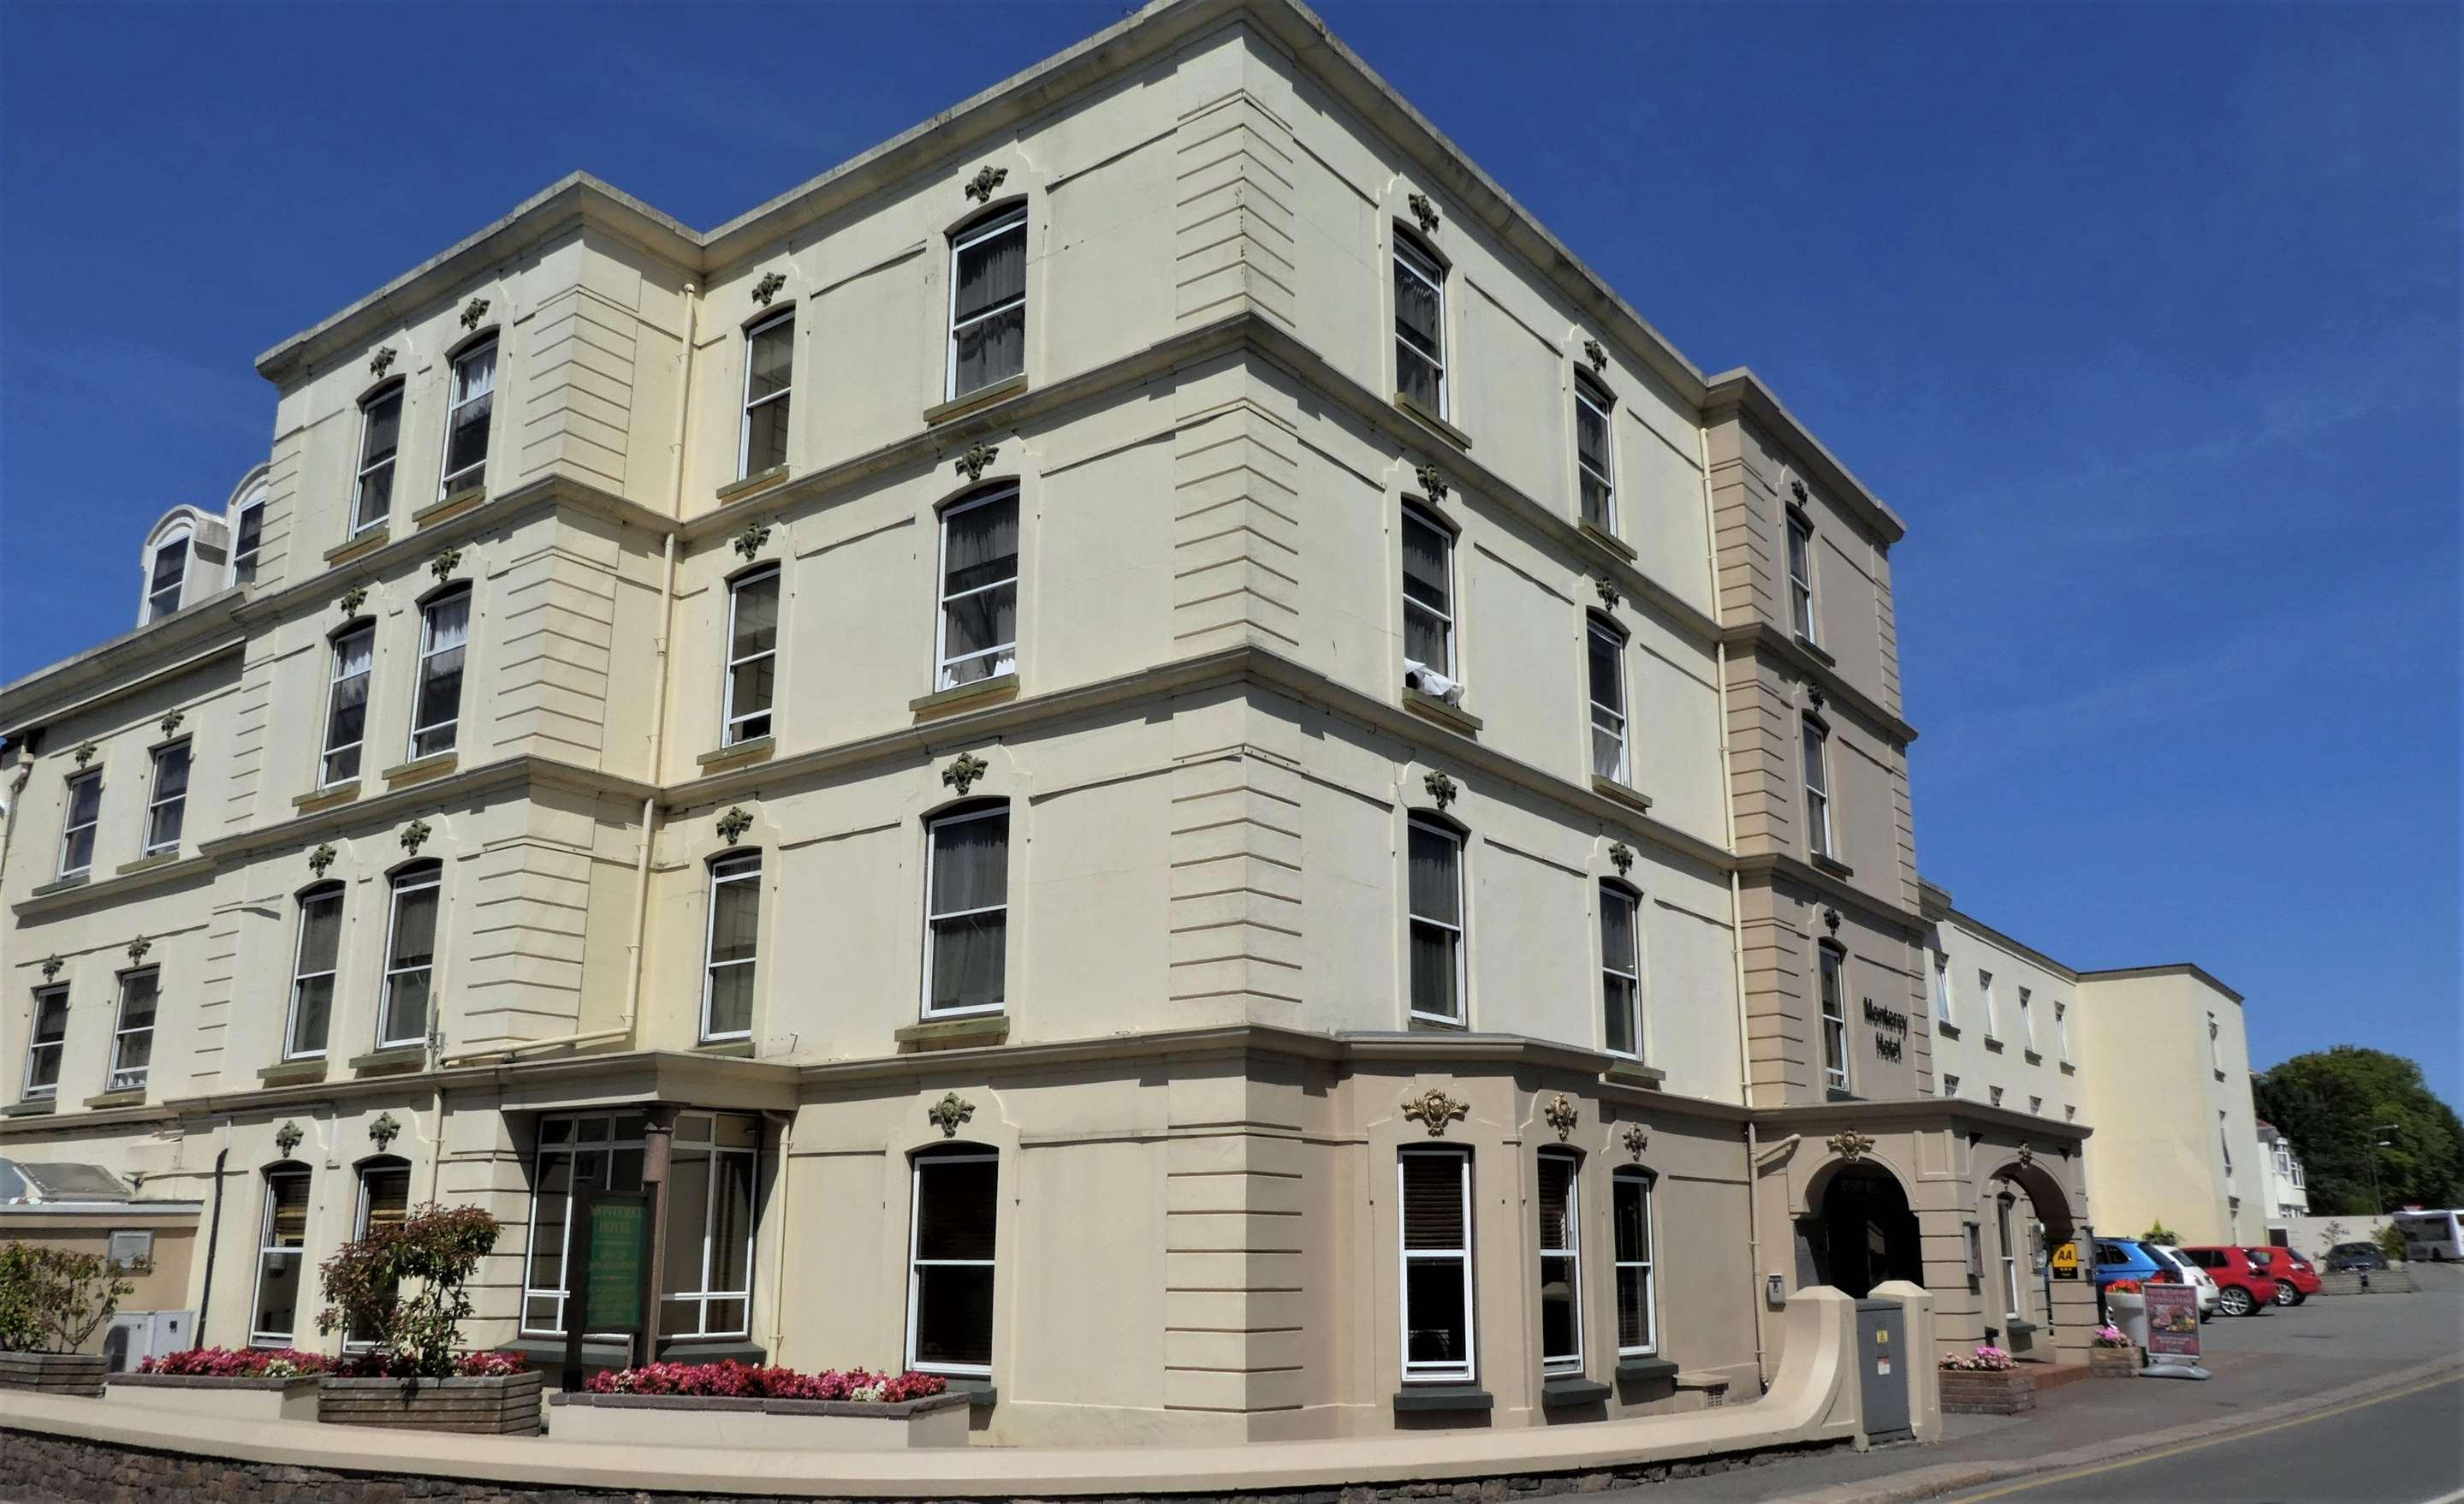 places to stay in st helier jersey